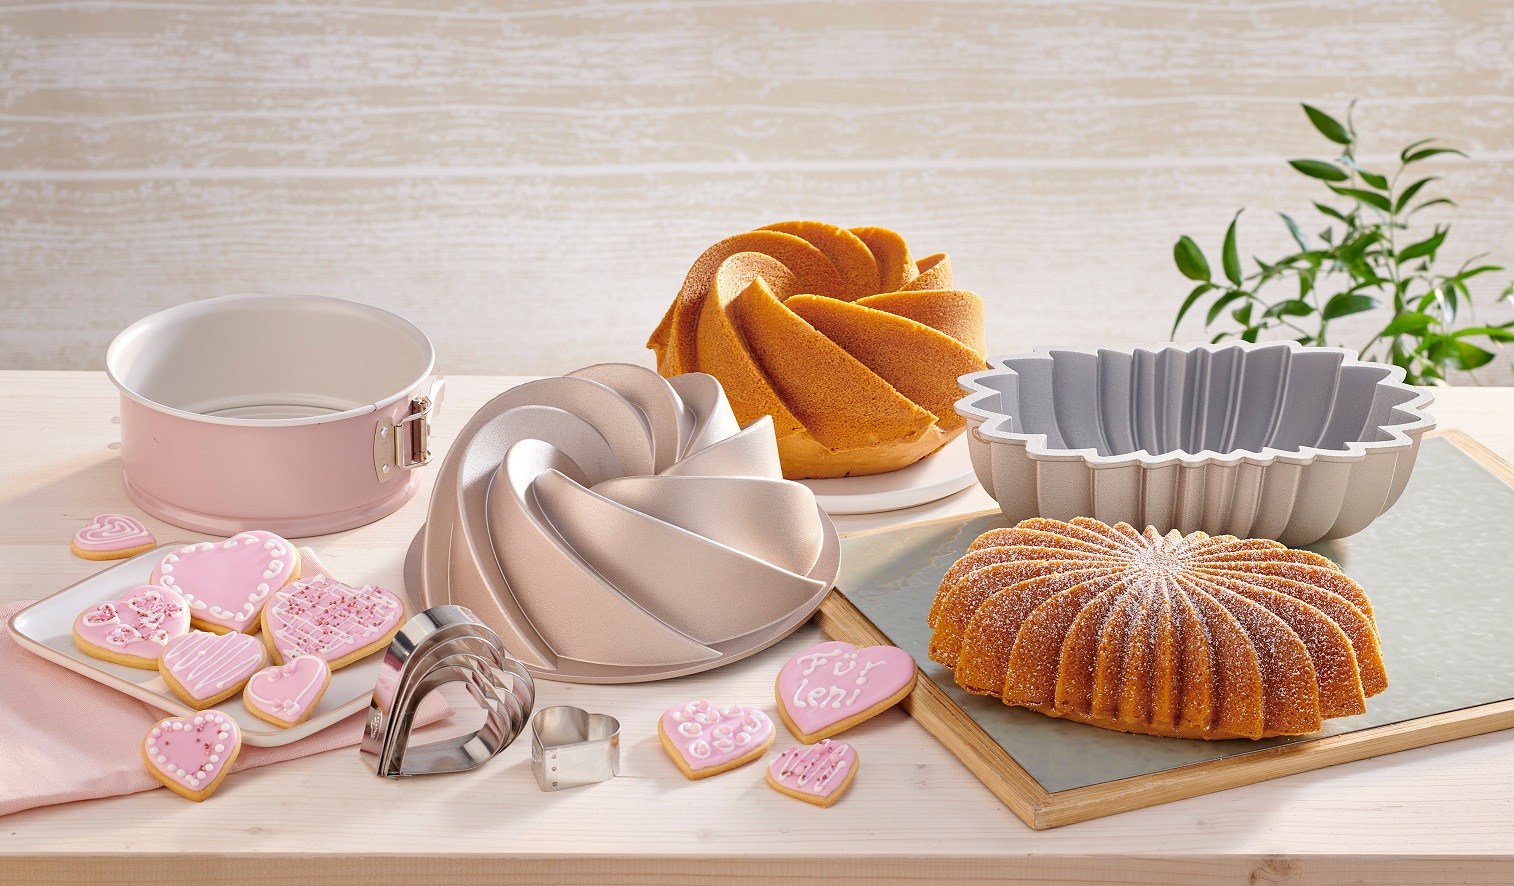 Baking pans for every occasion